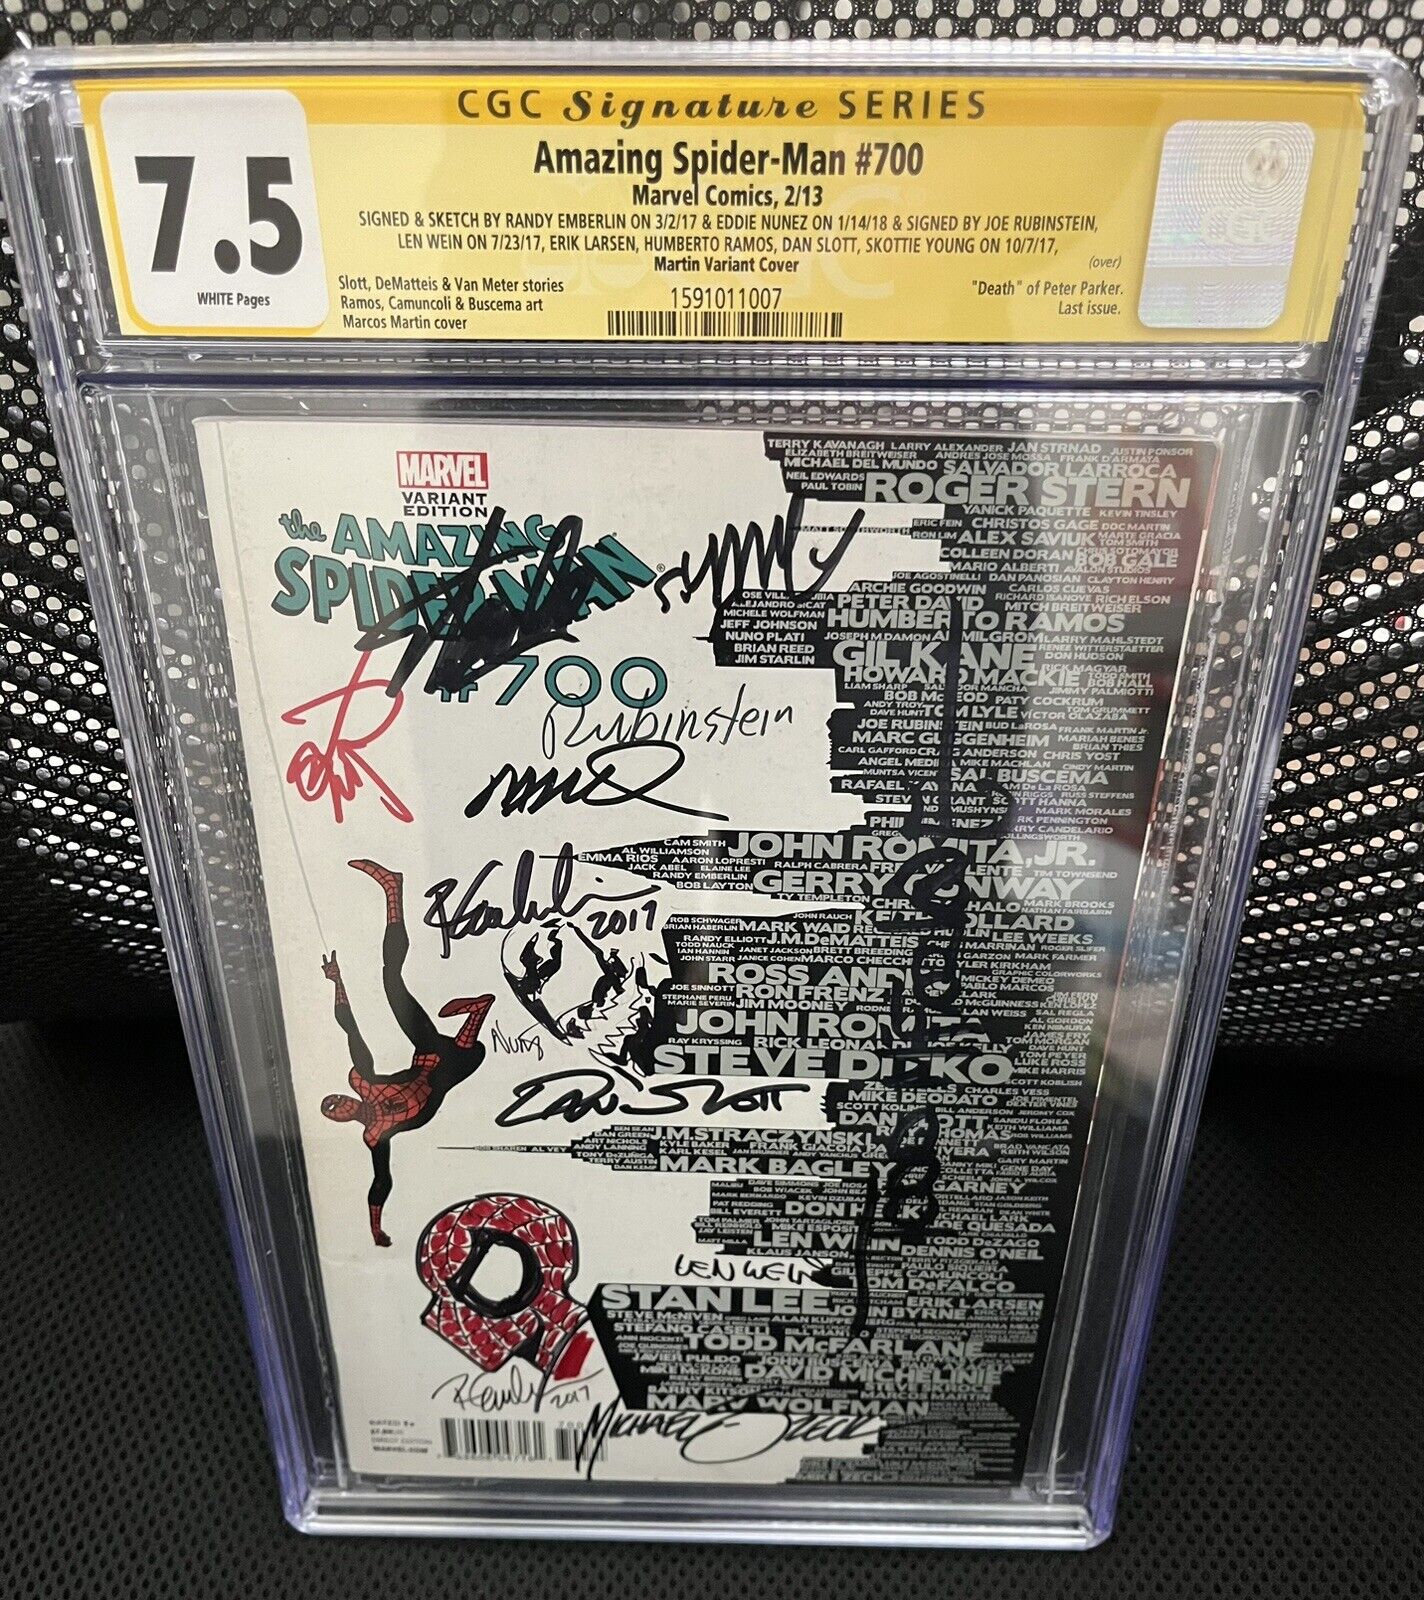 Amazing Spider-Man #700 CGC SS Stan Lee Sketched 2X Signed 11X Skyline Variant